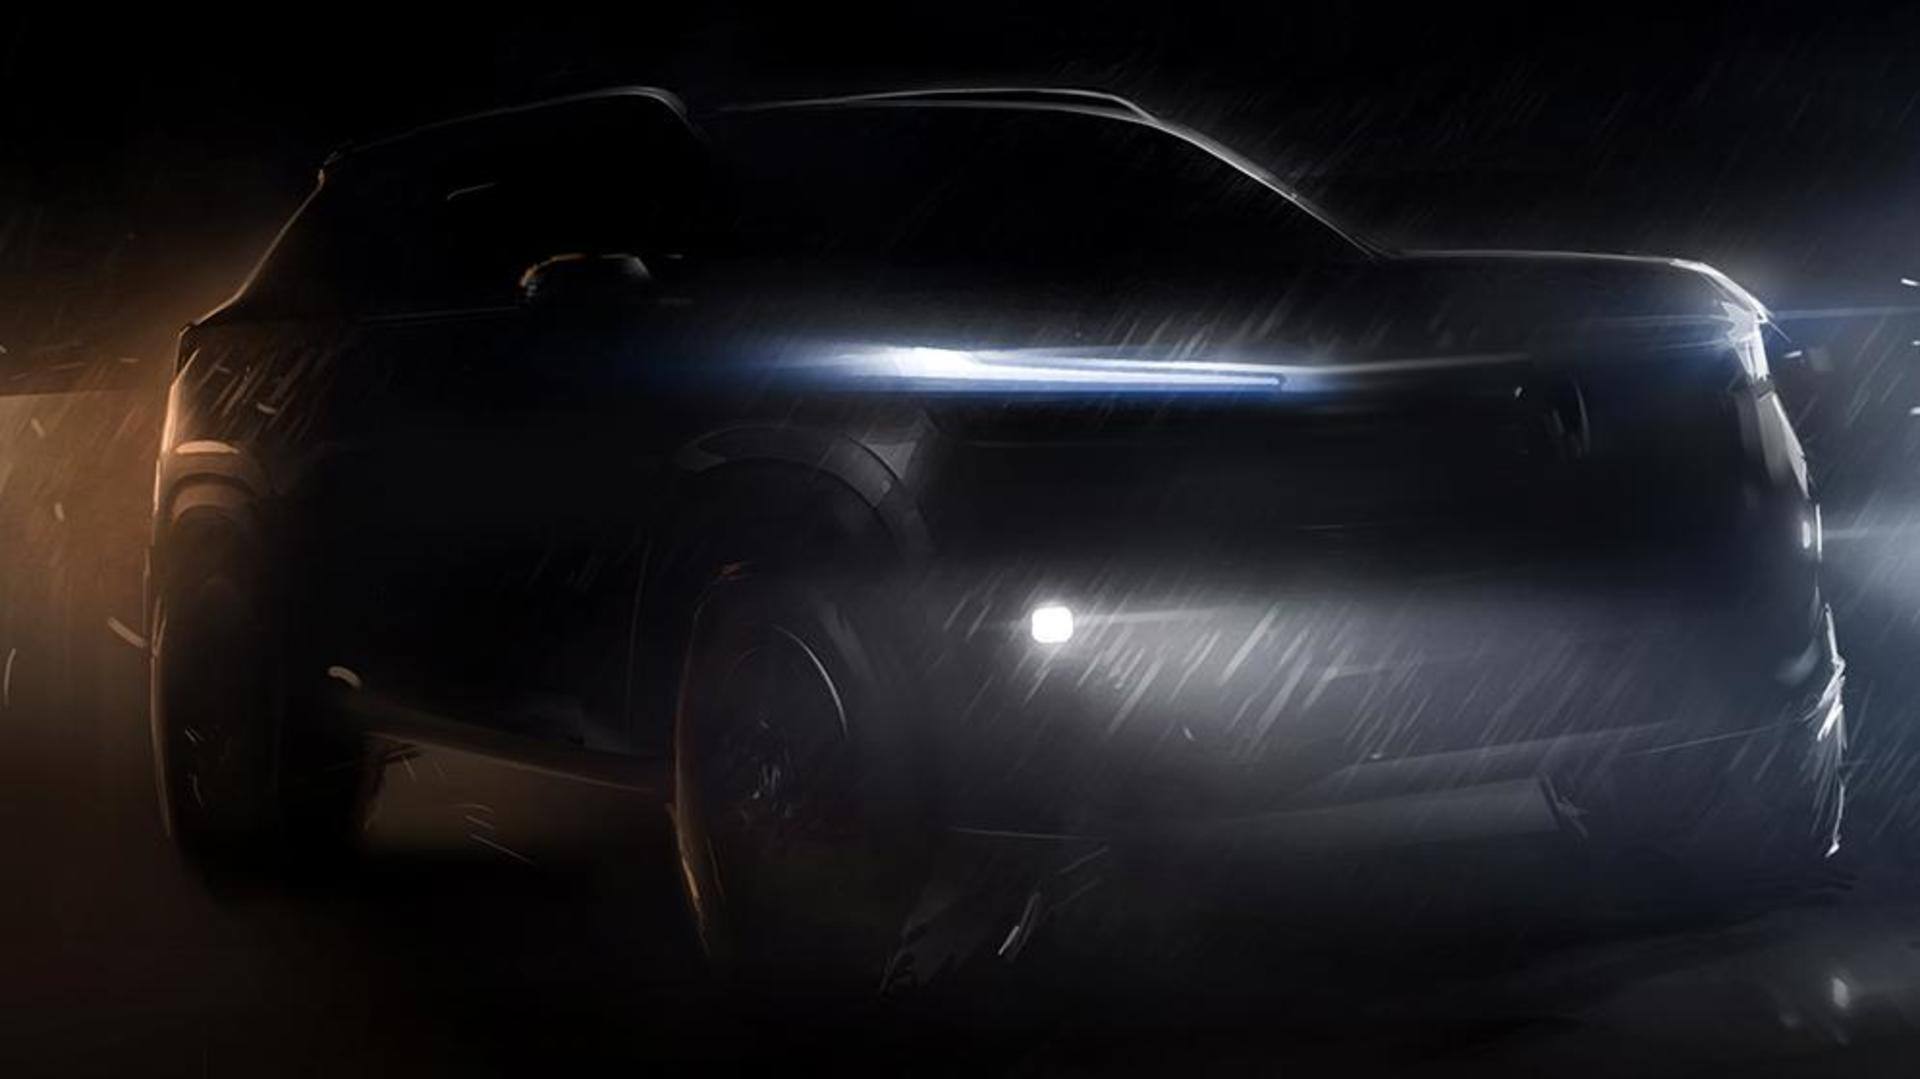 Honda teases its India-bound SUV; debut in summer 2023